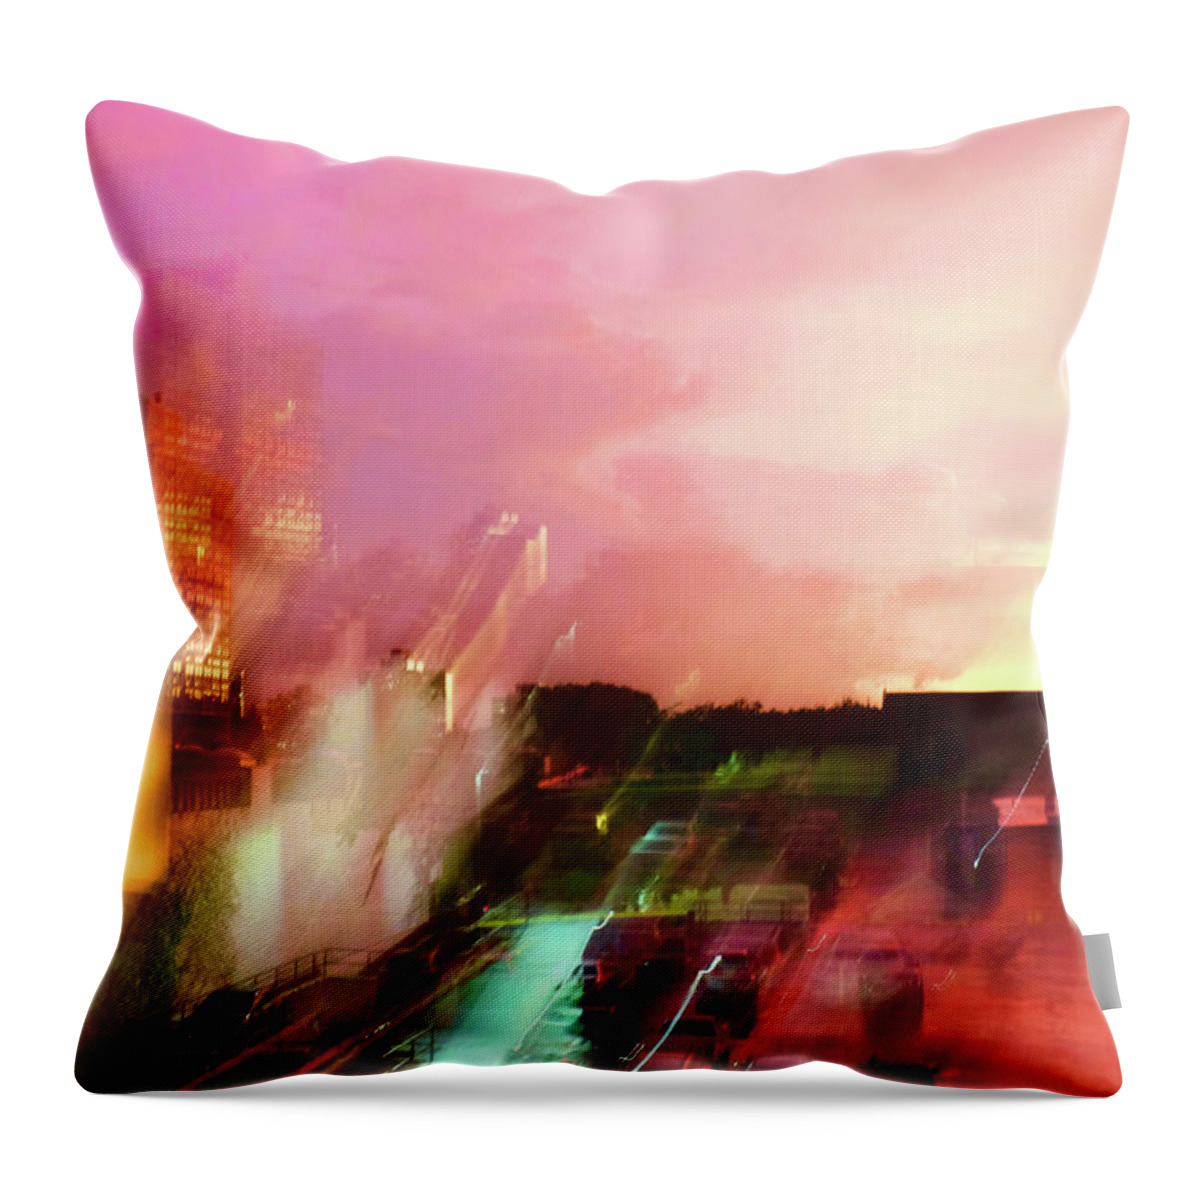 Sunset Throw Pillow featuring the photograph Sunset Motion Impression In Red And Pink by Patrick Malon